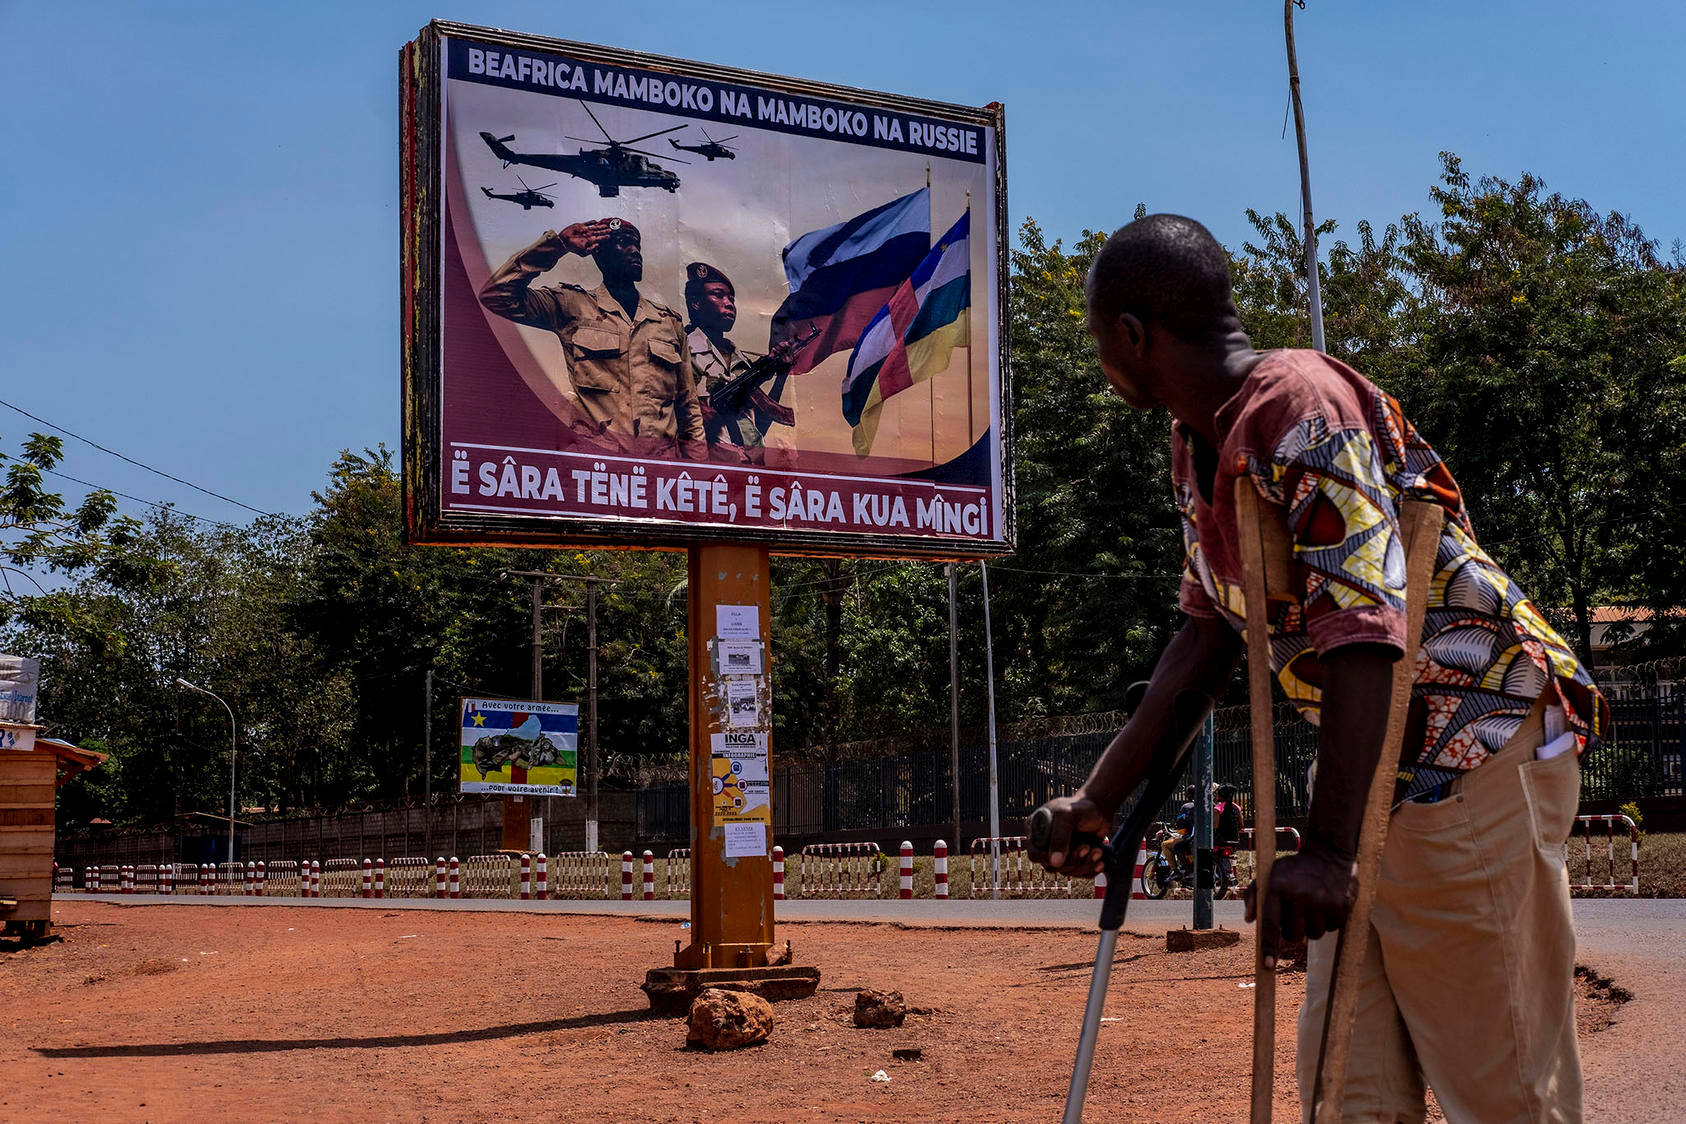 Injured Man In Central African Republic Background